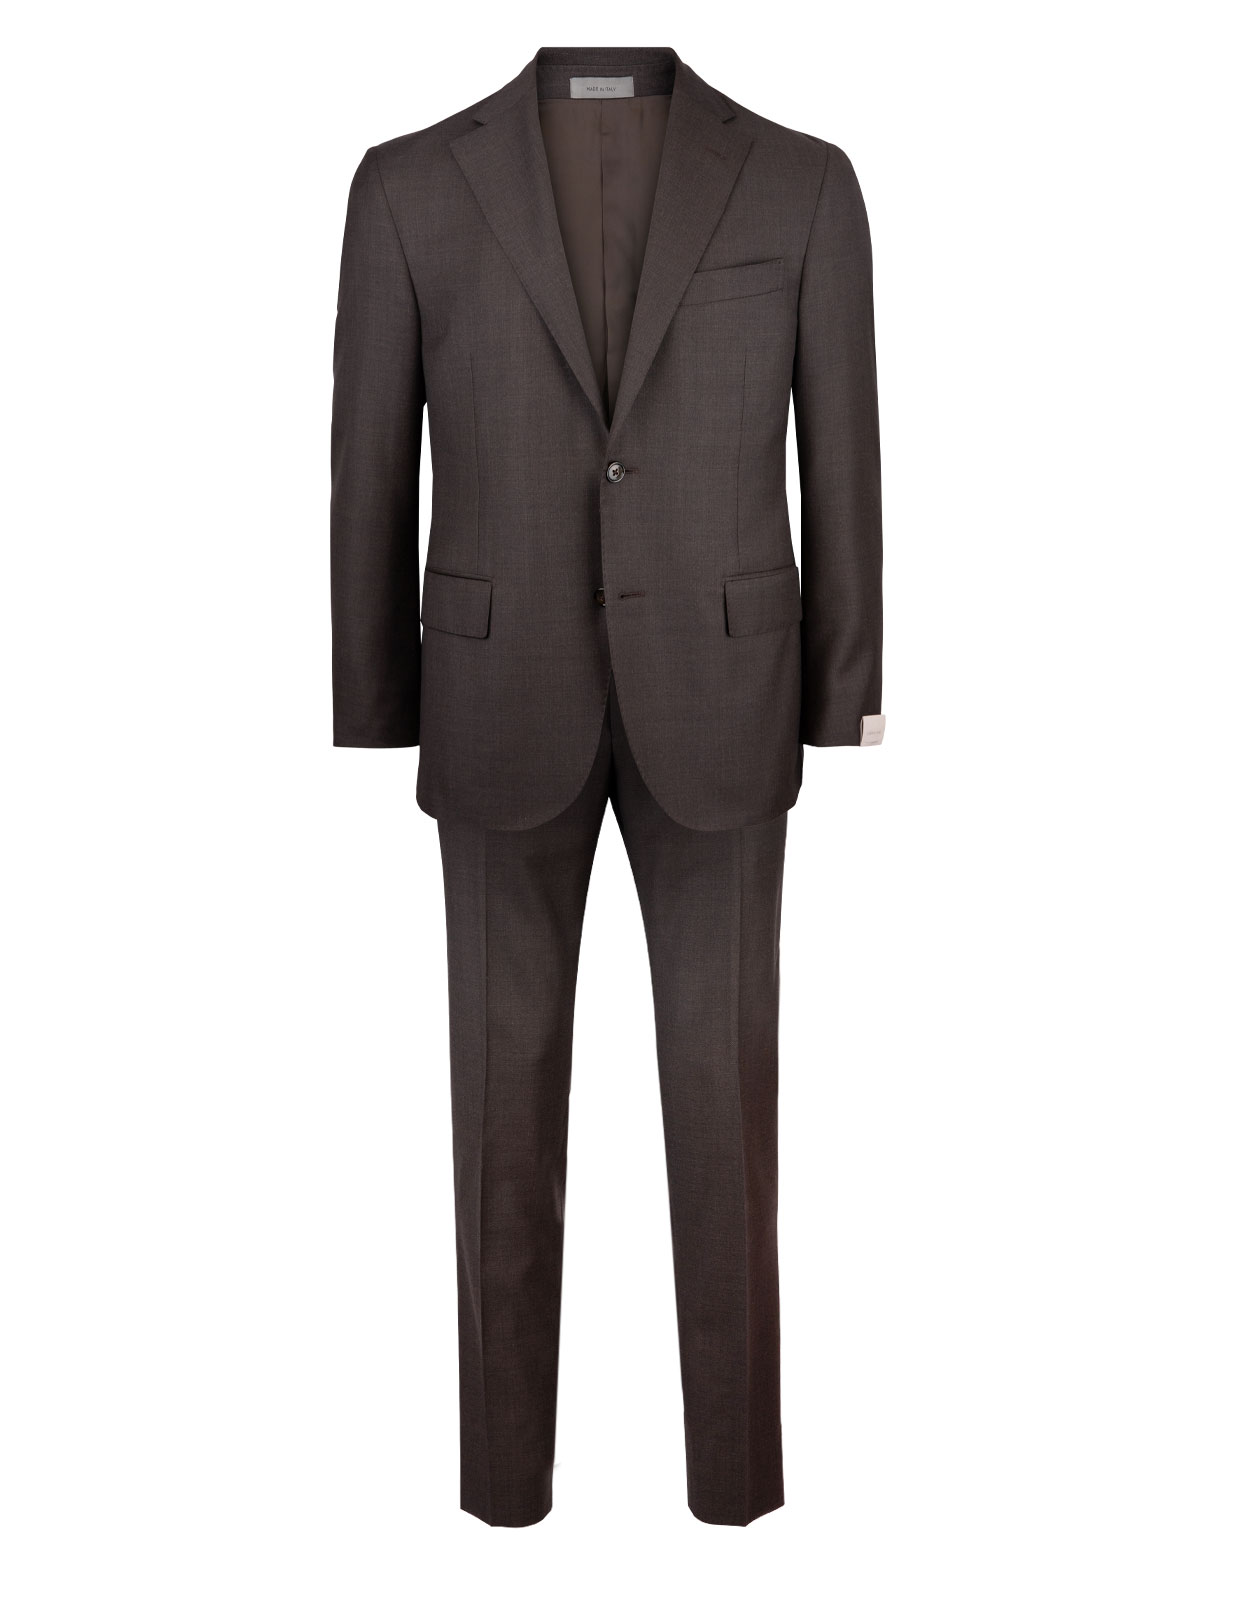 Academy Soft Suit 130's  Wool Brown Stl 50